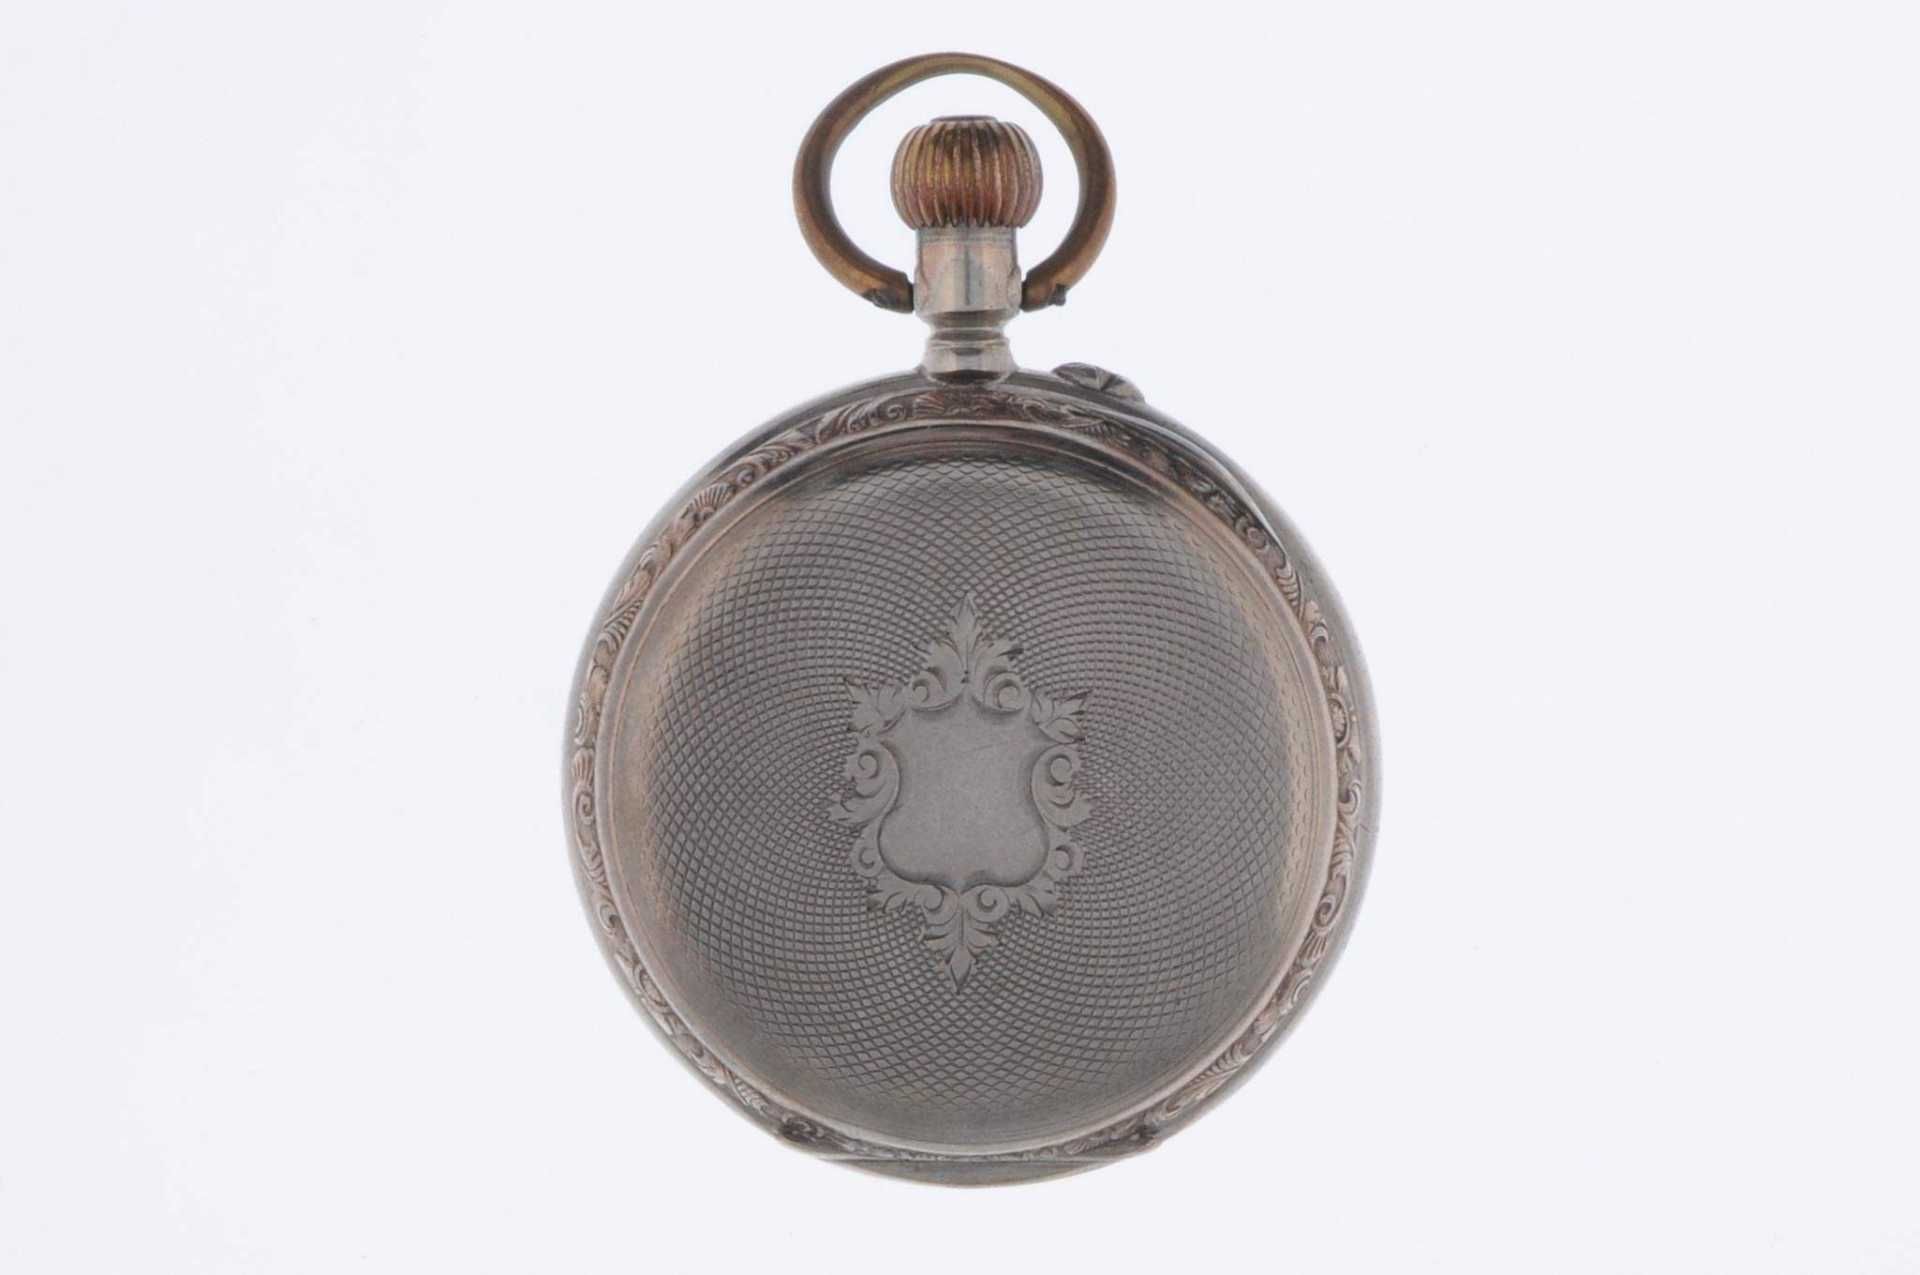 Spring cover pocket-watch \\\minerva\\\. Ca. 45 mm, about 1880-1900, Switzerland, 800er silver with - Image 2 of 5